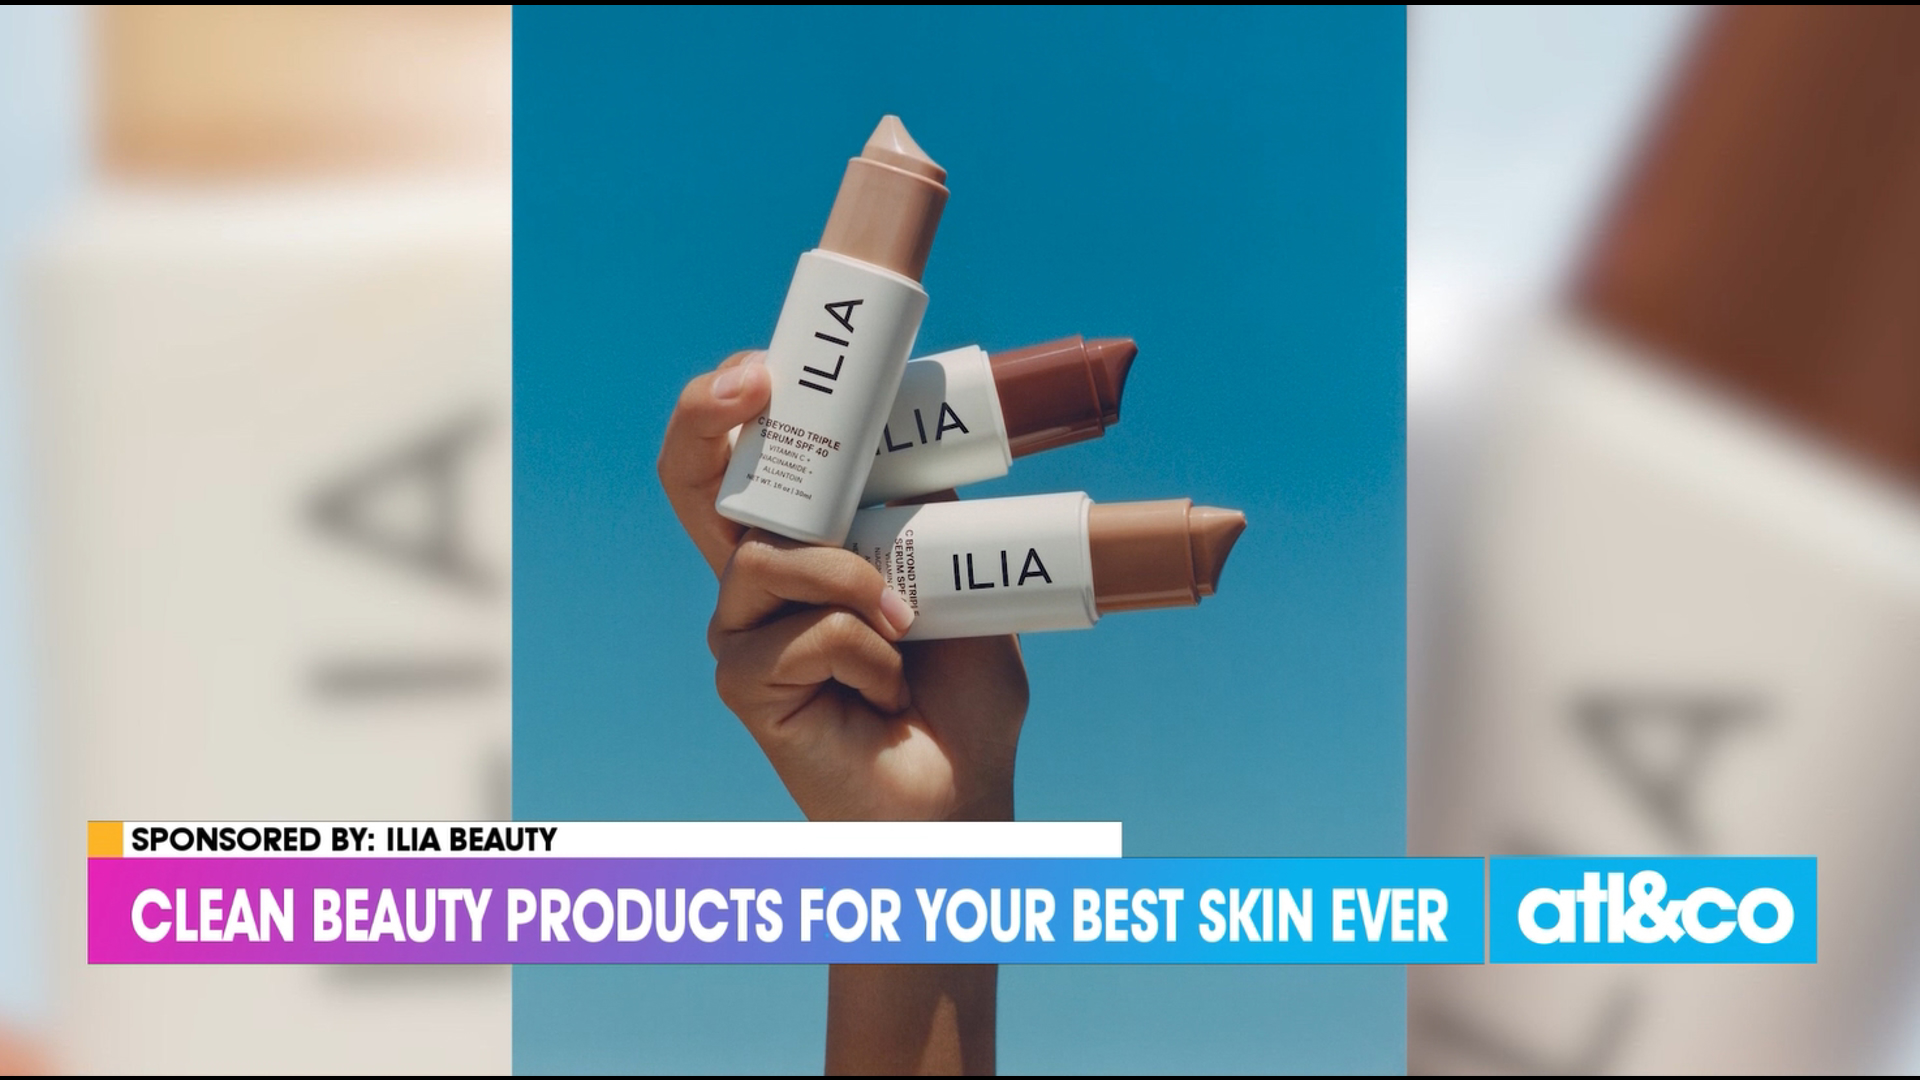 See how ILIA Beauty's award-winning products bring new meaning to clean beauty.